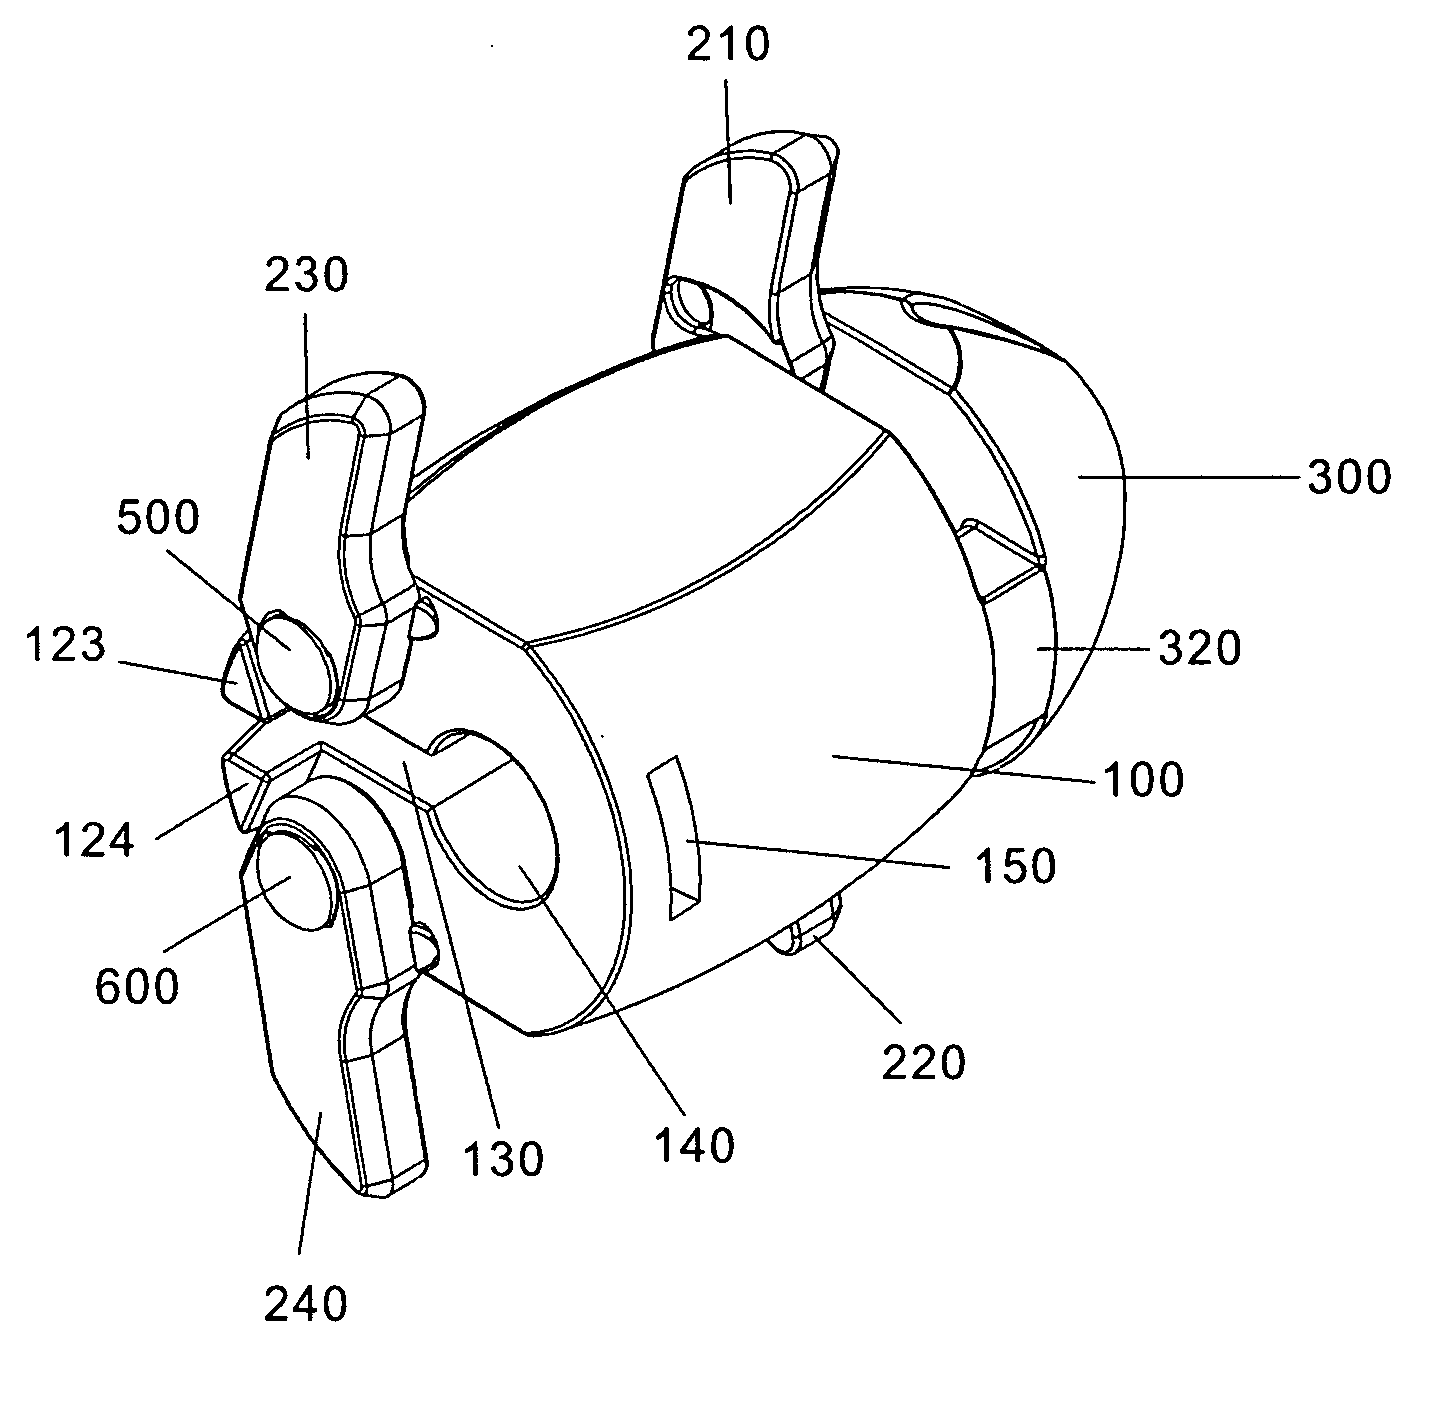 Interspinous spinal fixation apparatus